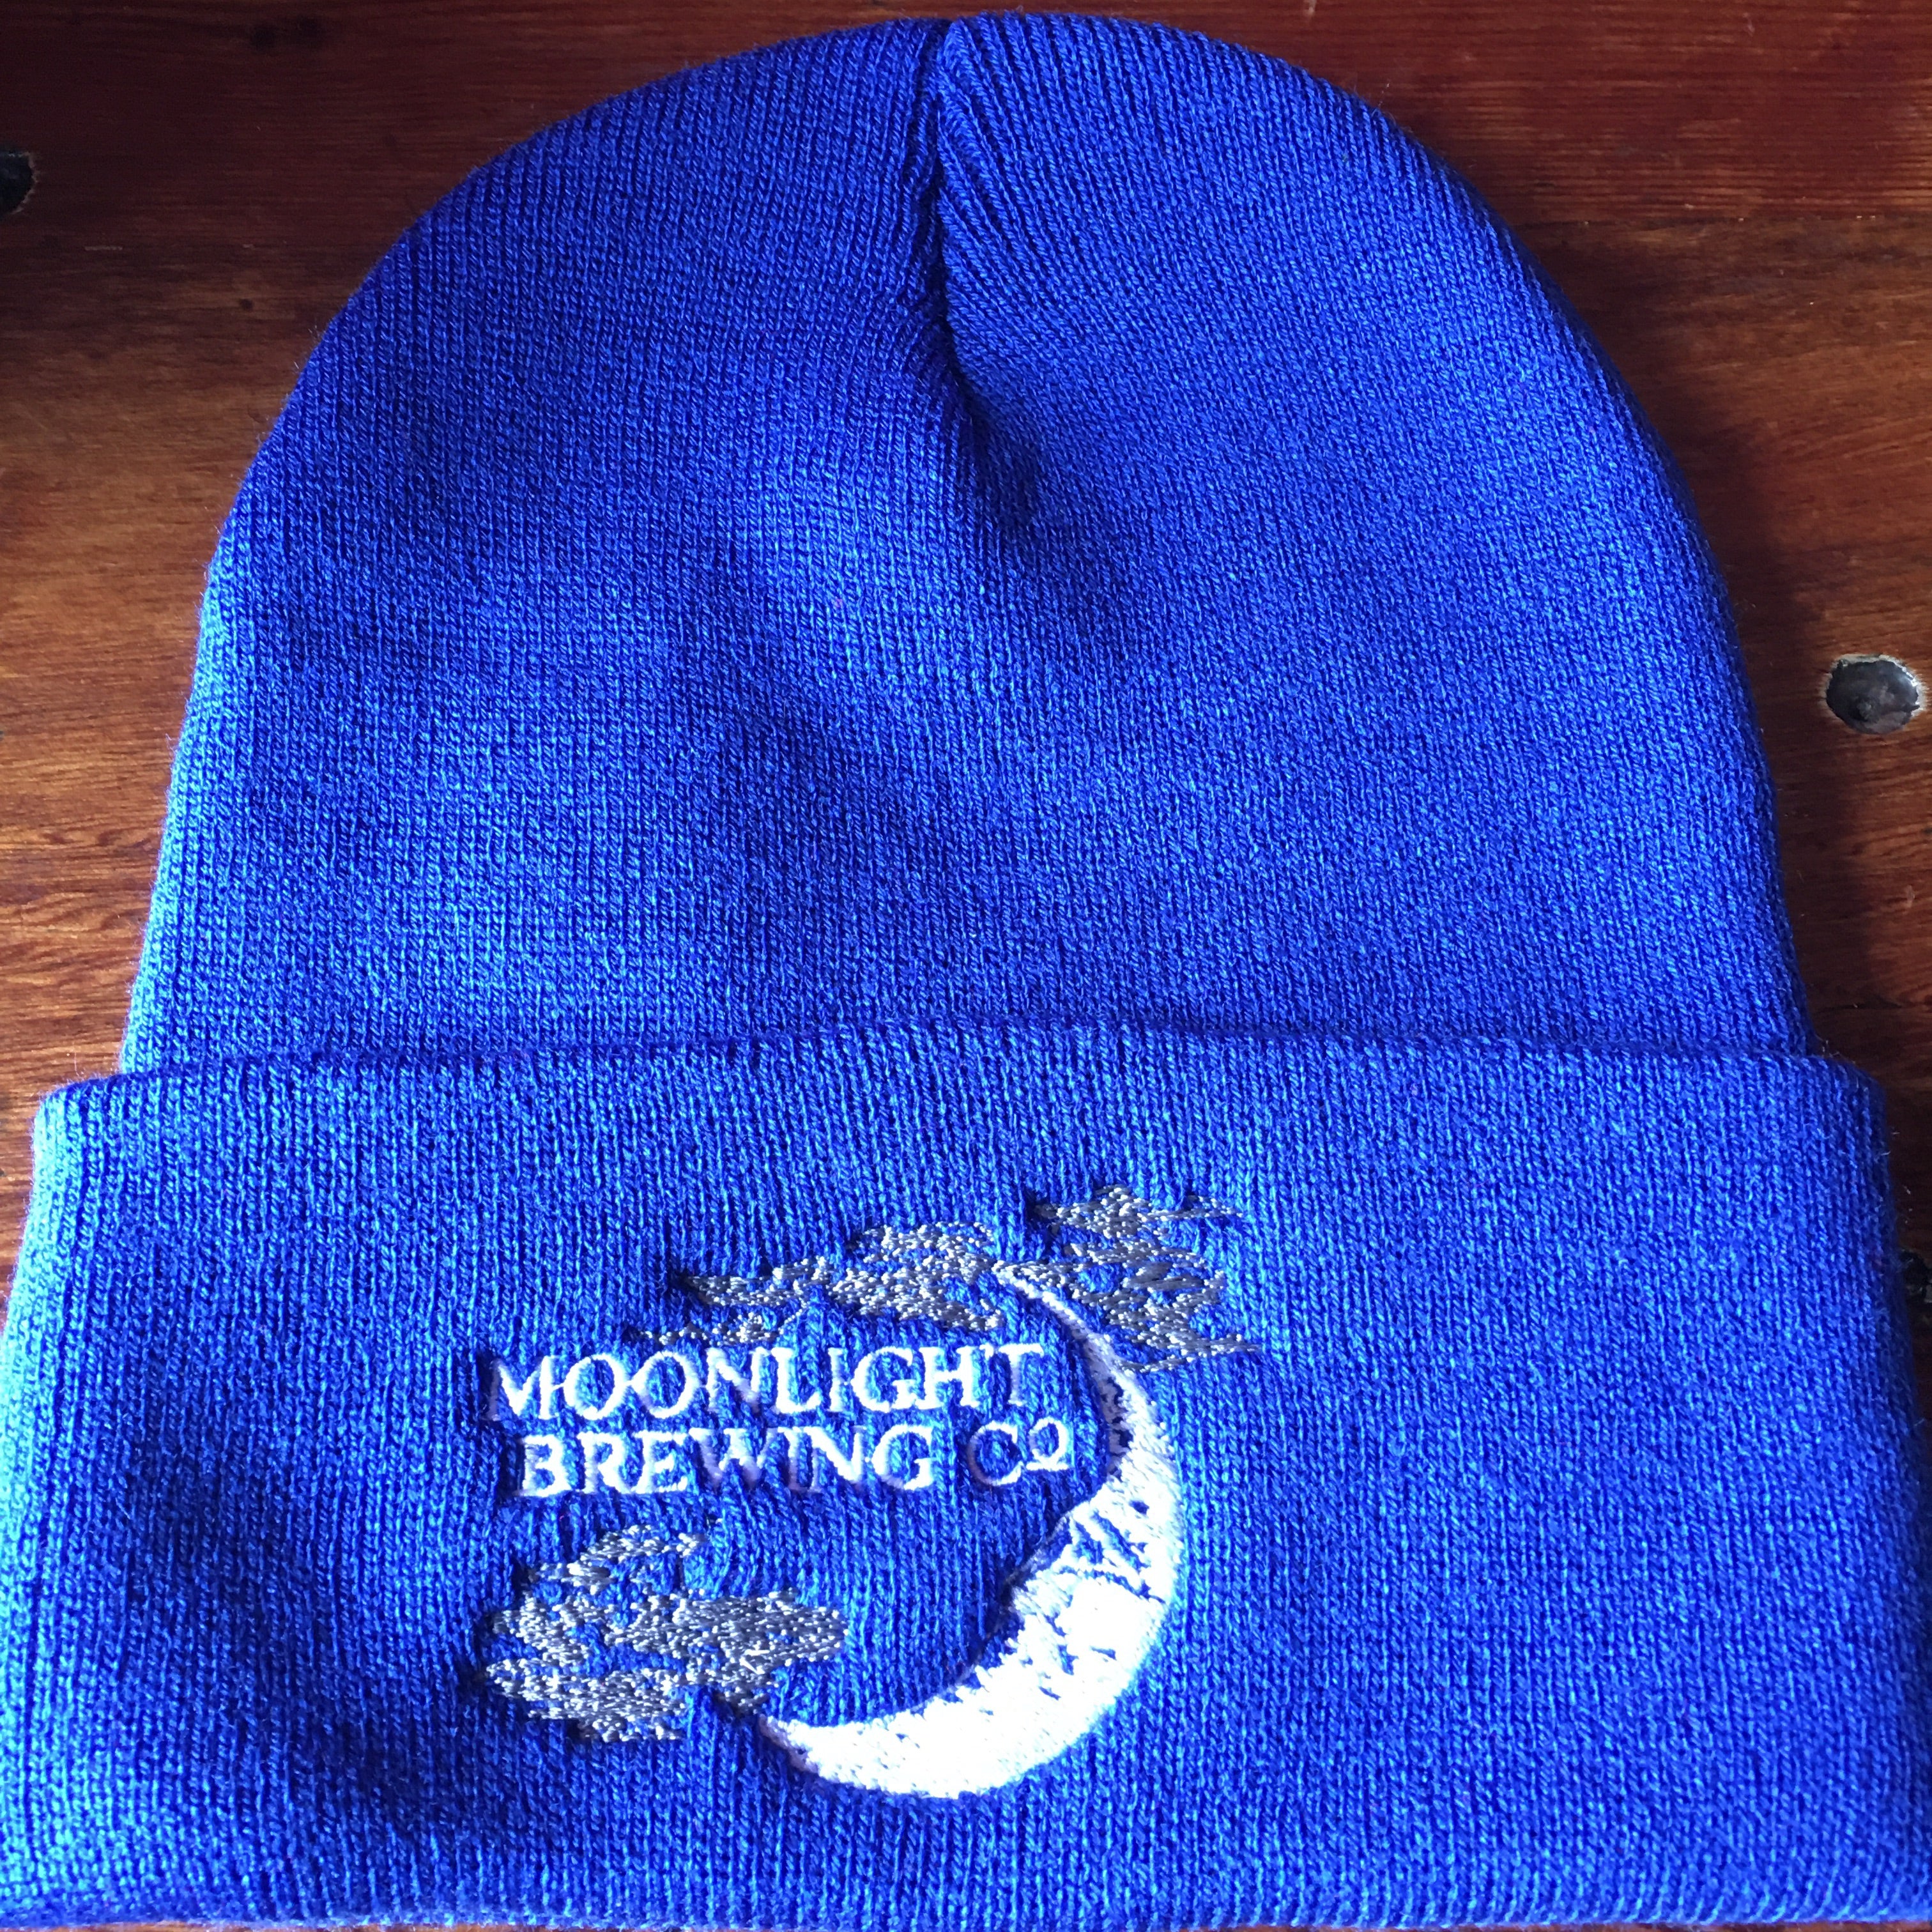 Blue beanie with Moonlight Brewing logo on the front